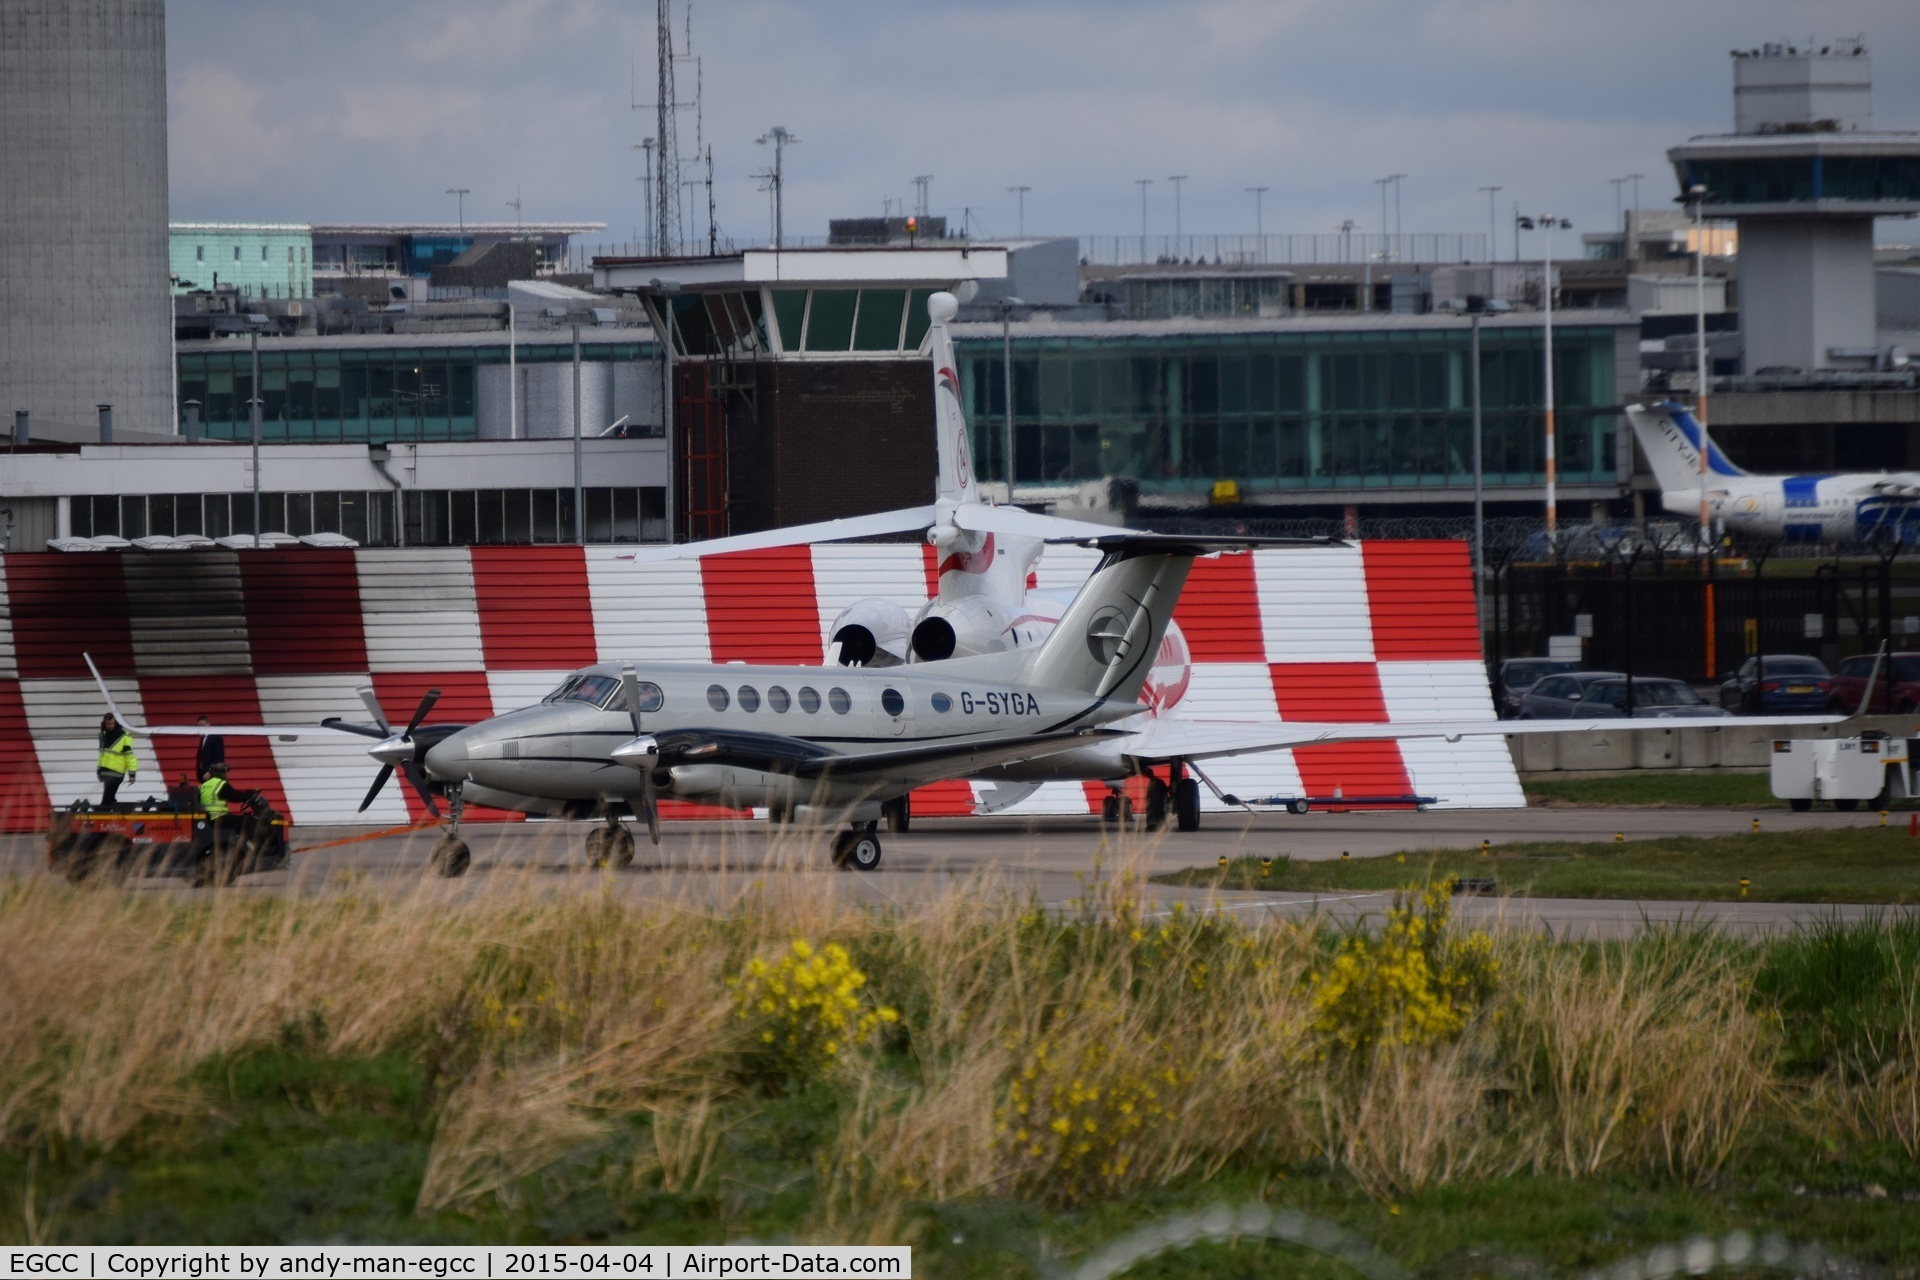 Manchester Airport, Manchester, England United Kingdom (EGCC) - parked on the landmark exc ramp

G-SYGA PH-AJX

photo taken from the AVP